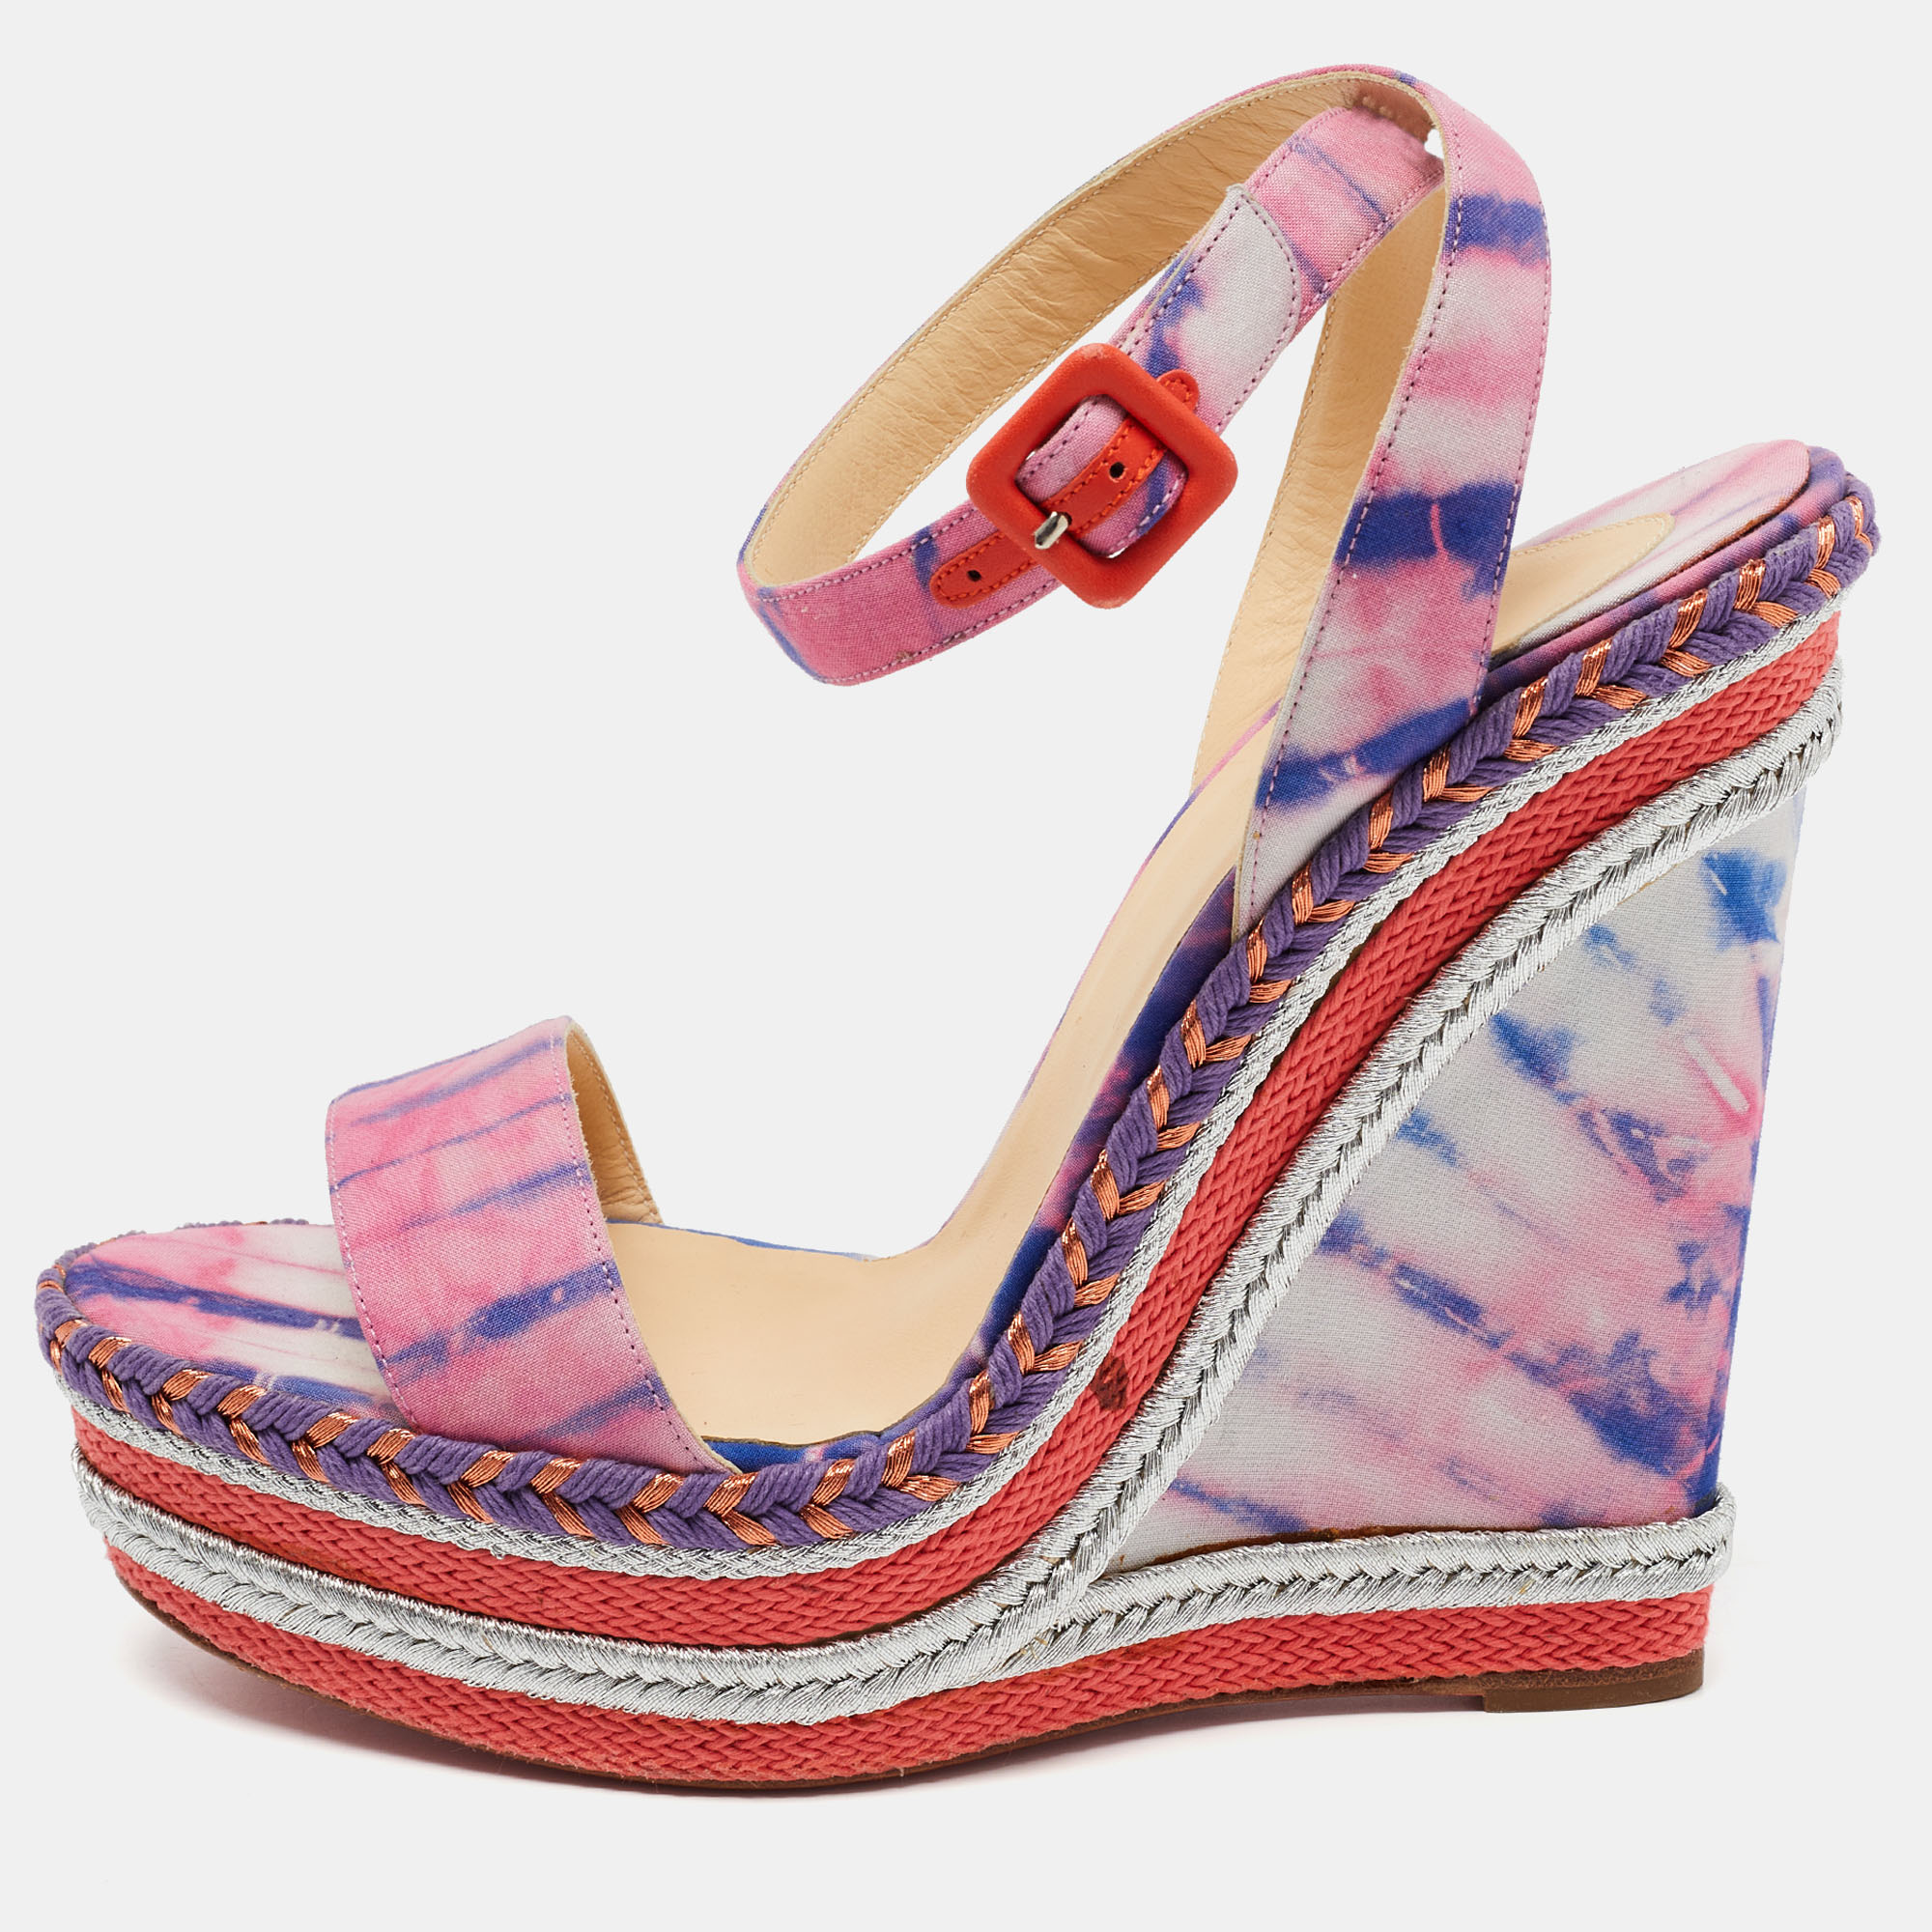 Christian Louboutin Multicolor Tie-Dye Fabric Duplice Wedge Sandals Size 41